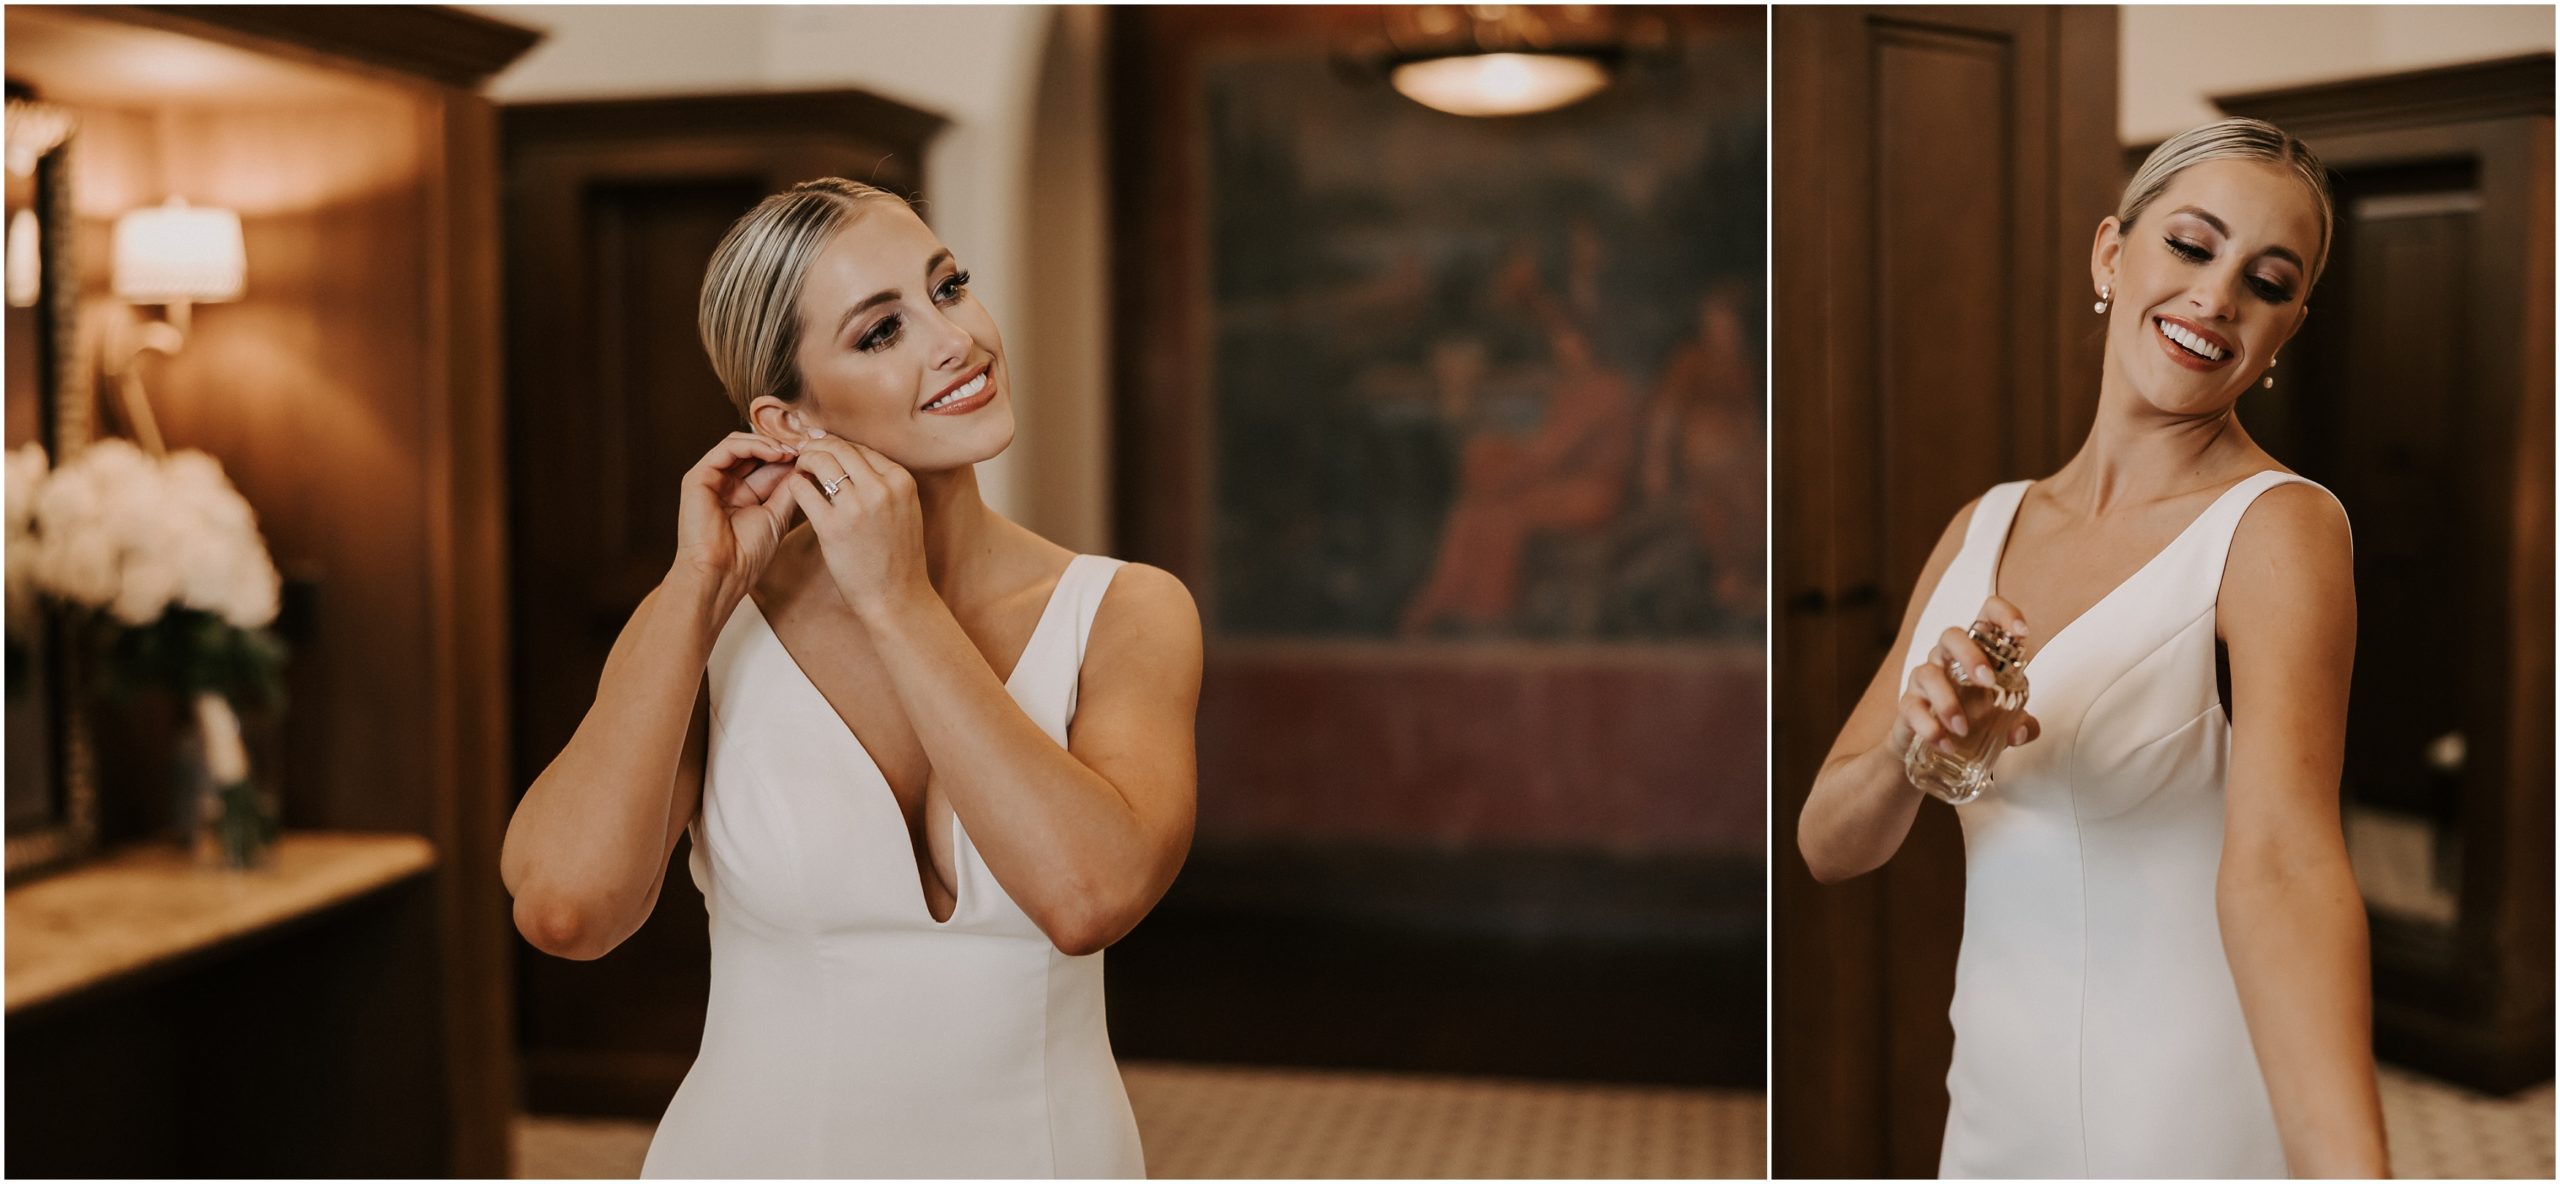 Sydney knew that she wanted an  elegant and timeless wedding look to her dress. She chose a more simple style in general, so this dress was simply perfect and elegant.